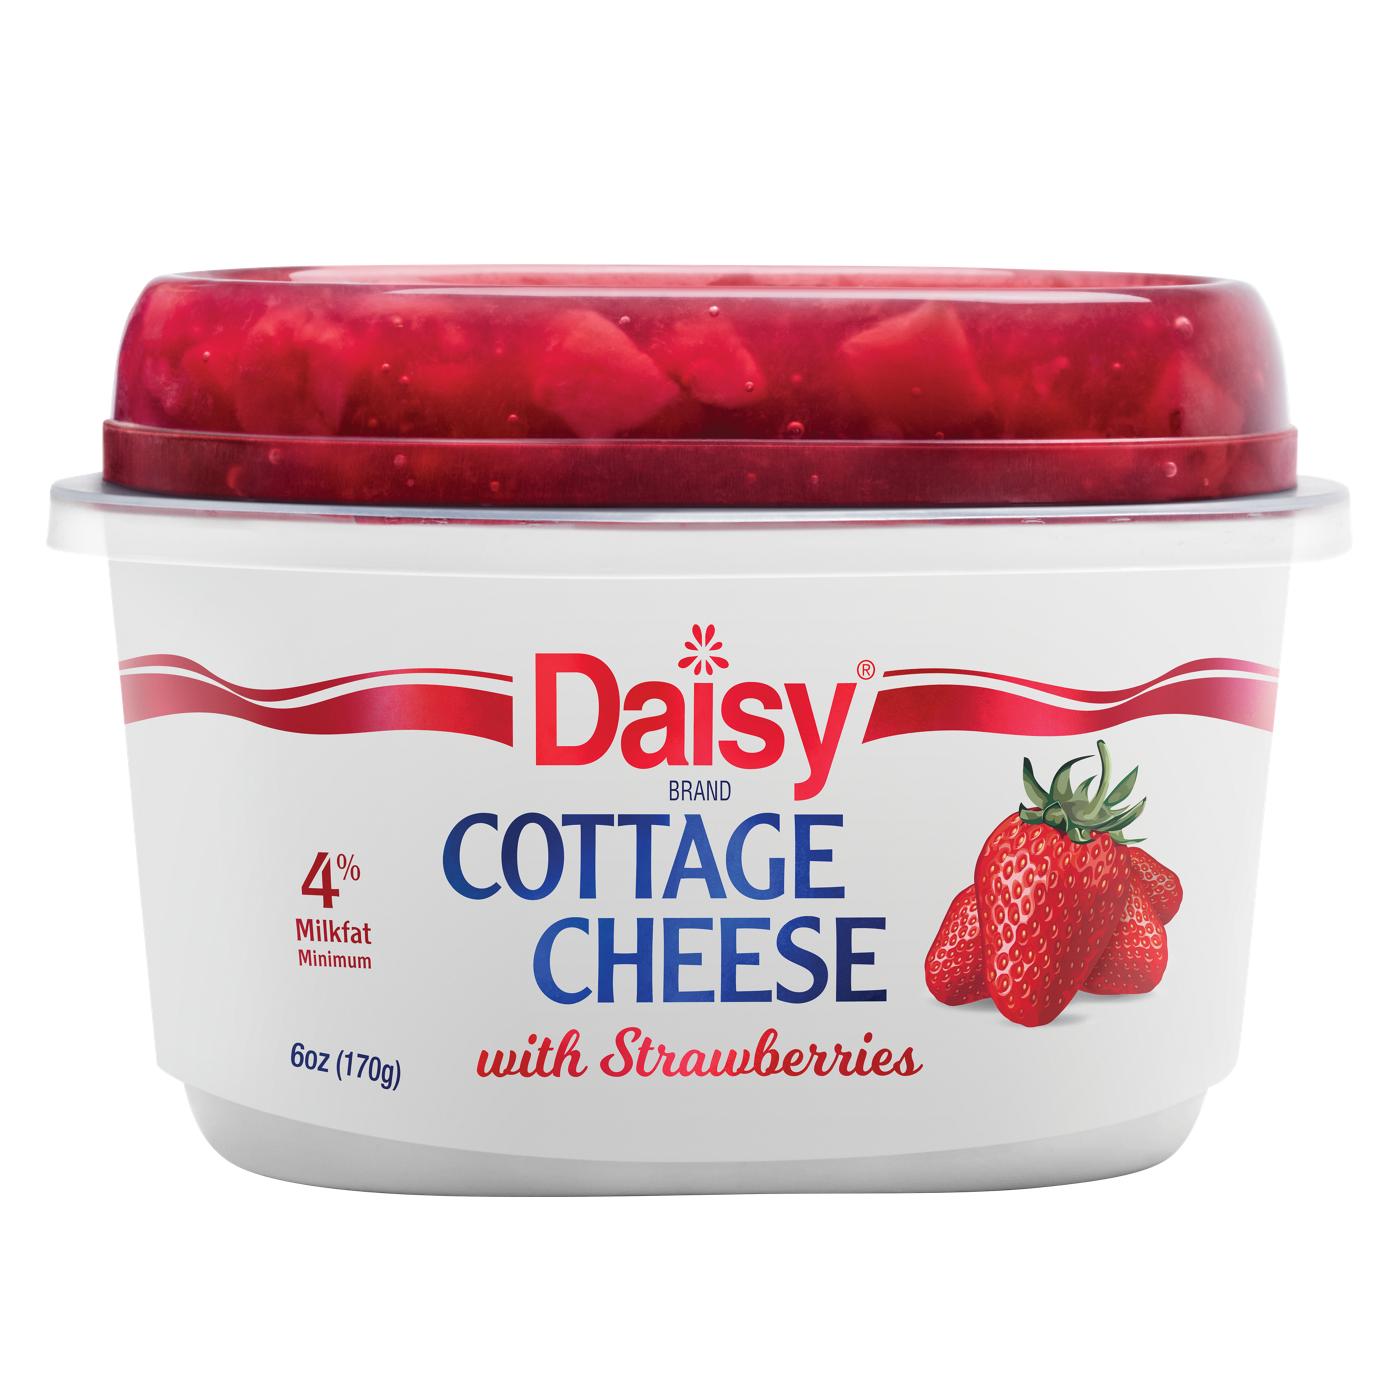 Daisy Cottage Cheese with Strawberries; image 1 of 5